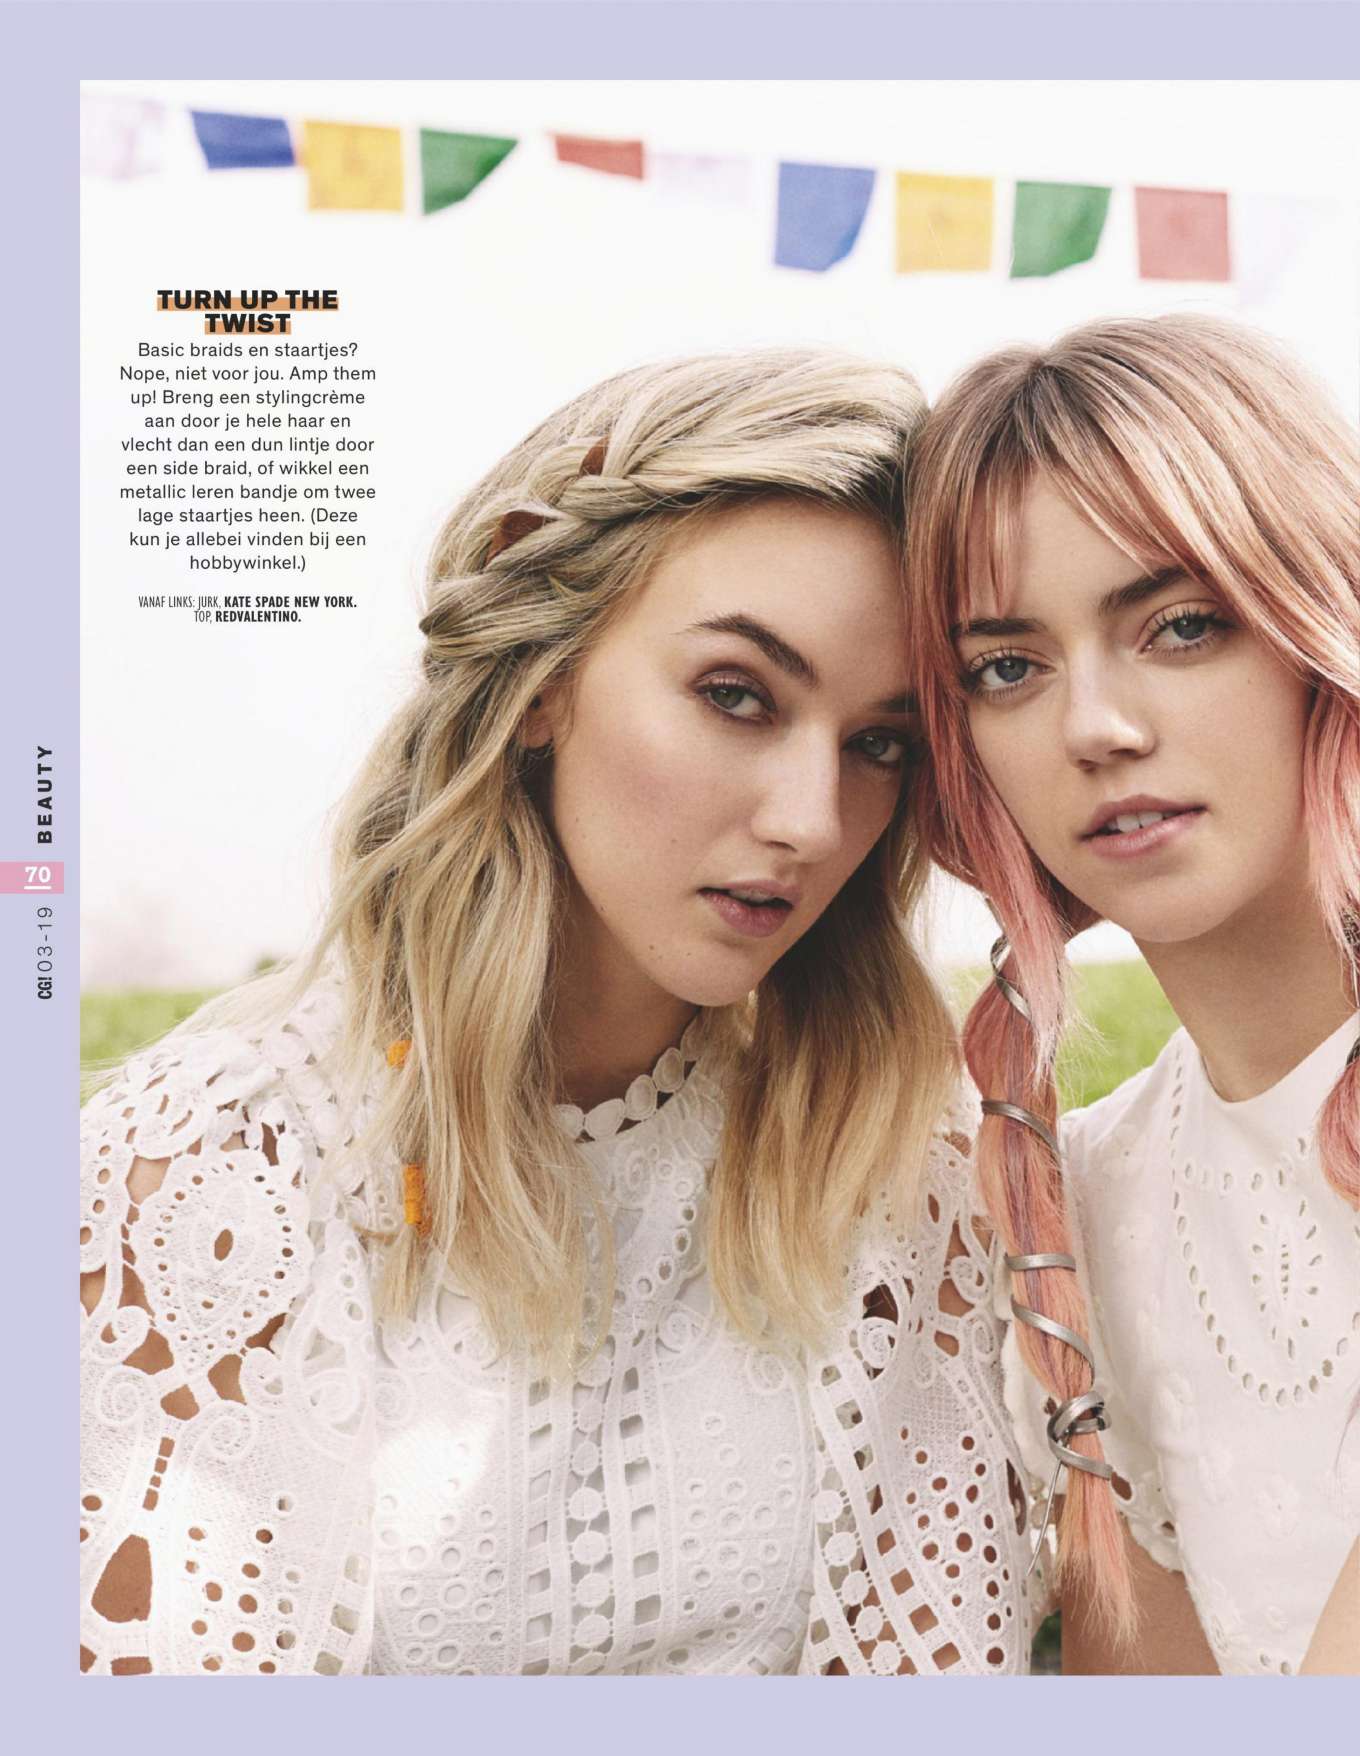 Pyper America And Daisy Clementine Smith â€“ CosmoGIRL! Magazine (July 2019)